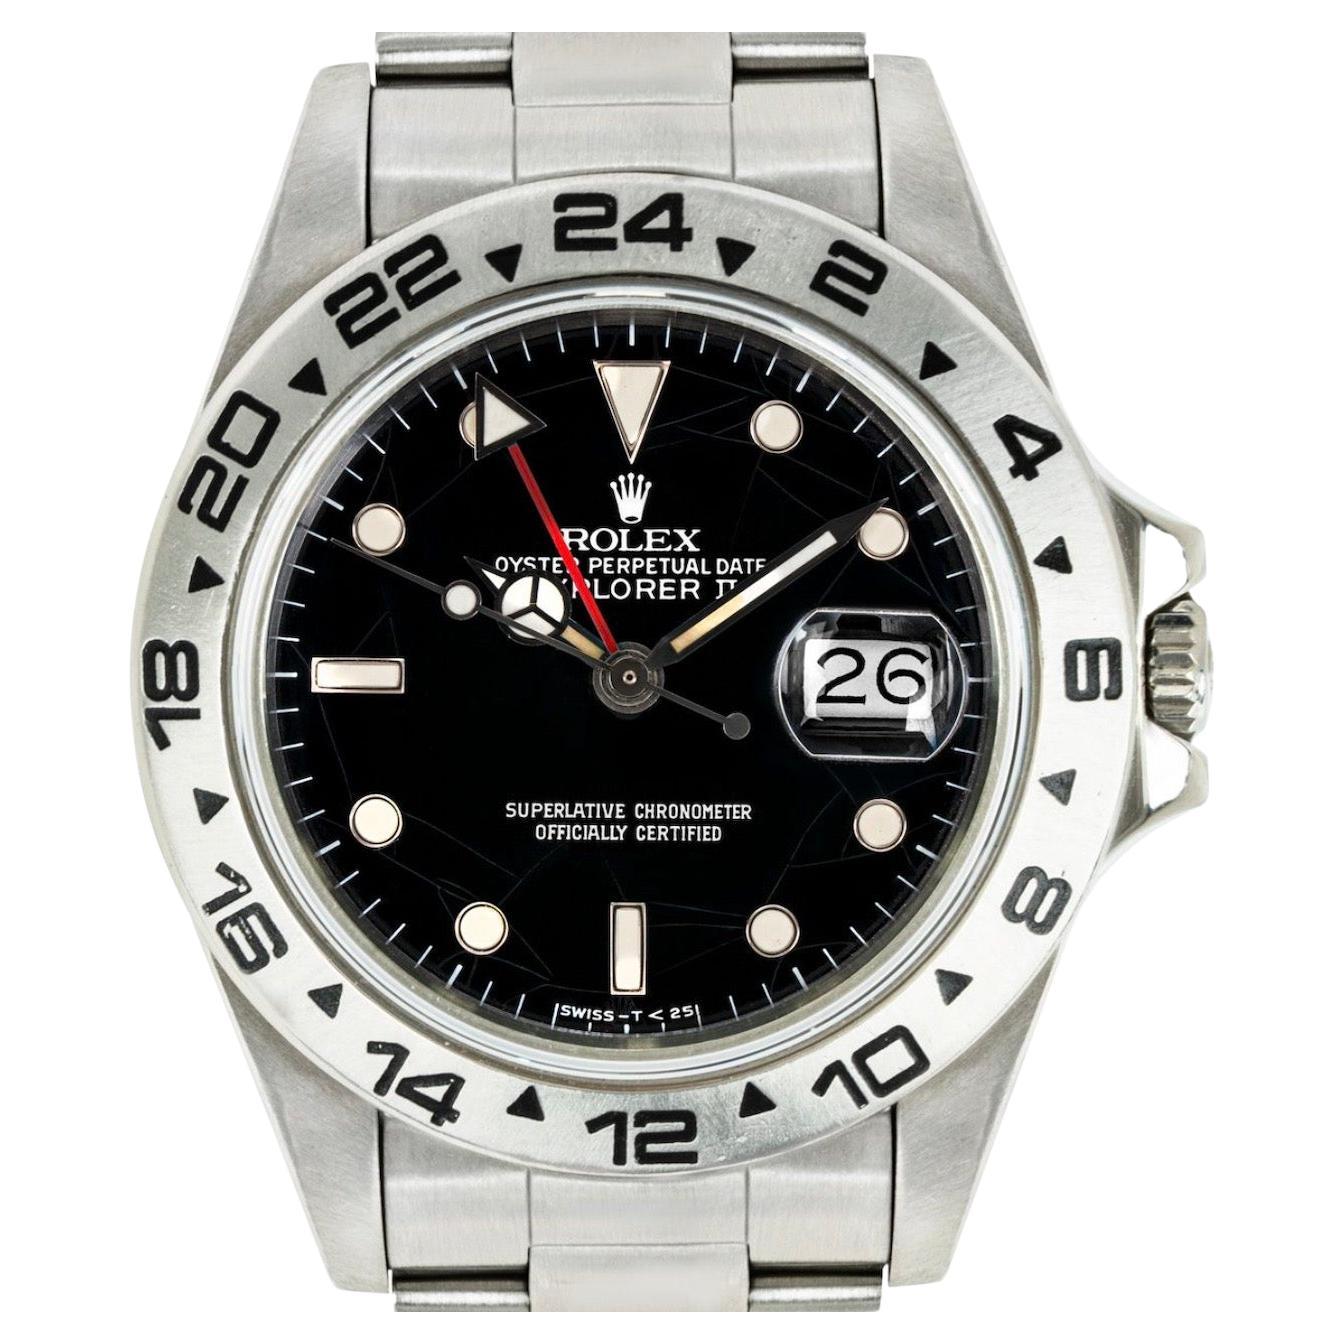 A striking Explorer II by Rolex, featuring an extremely rare and sought-after 